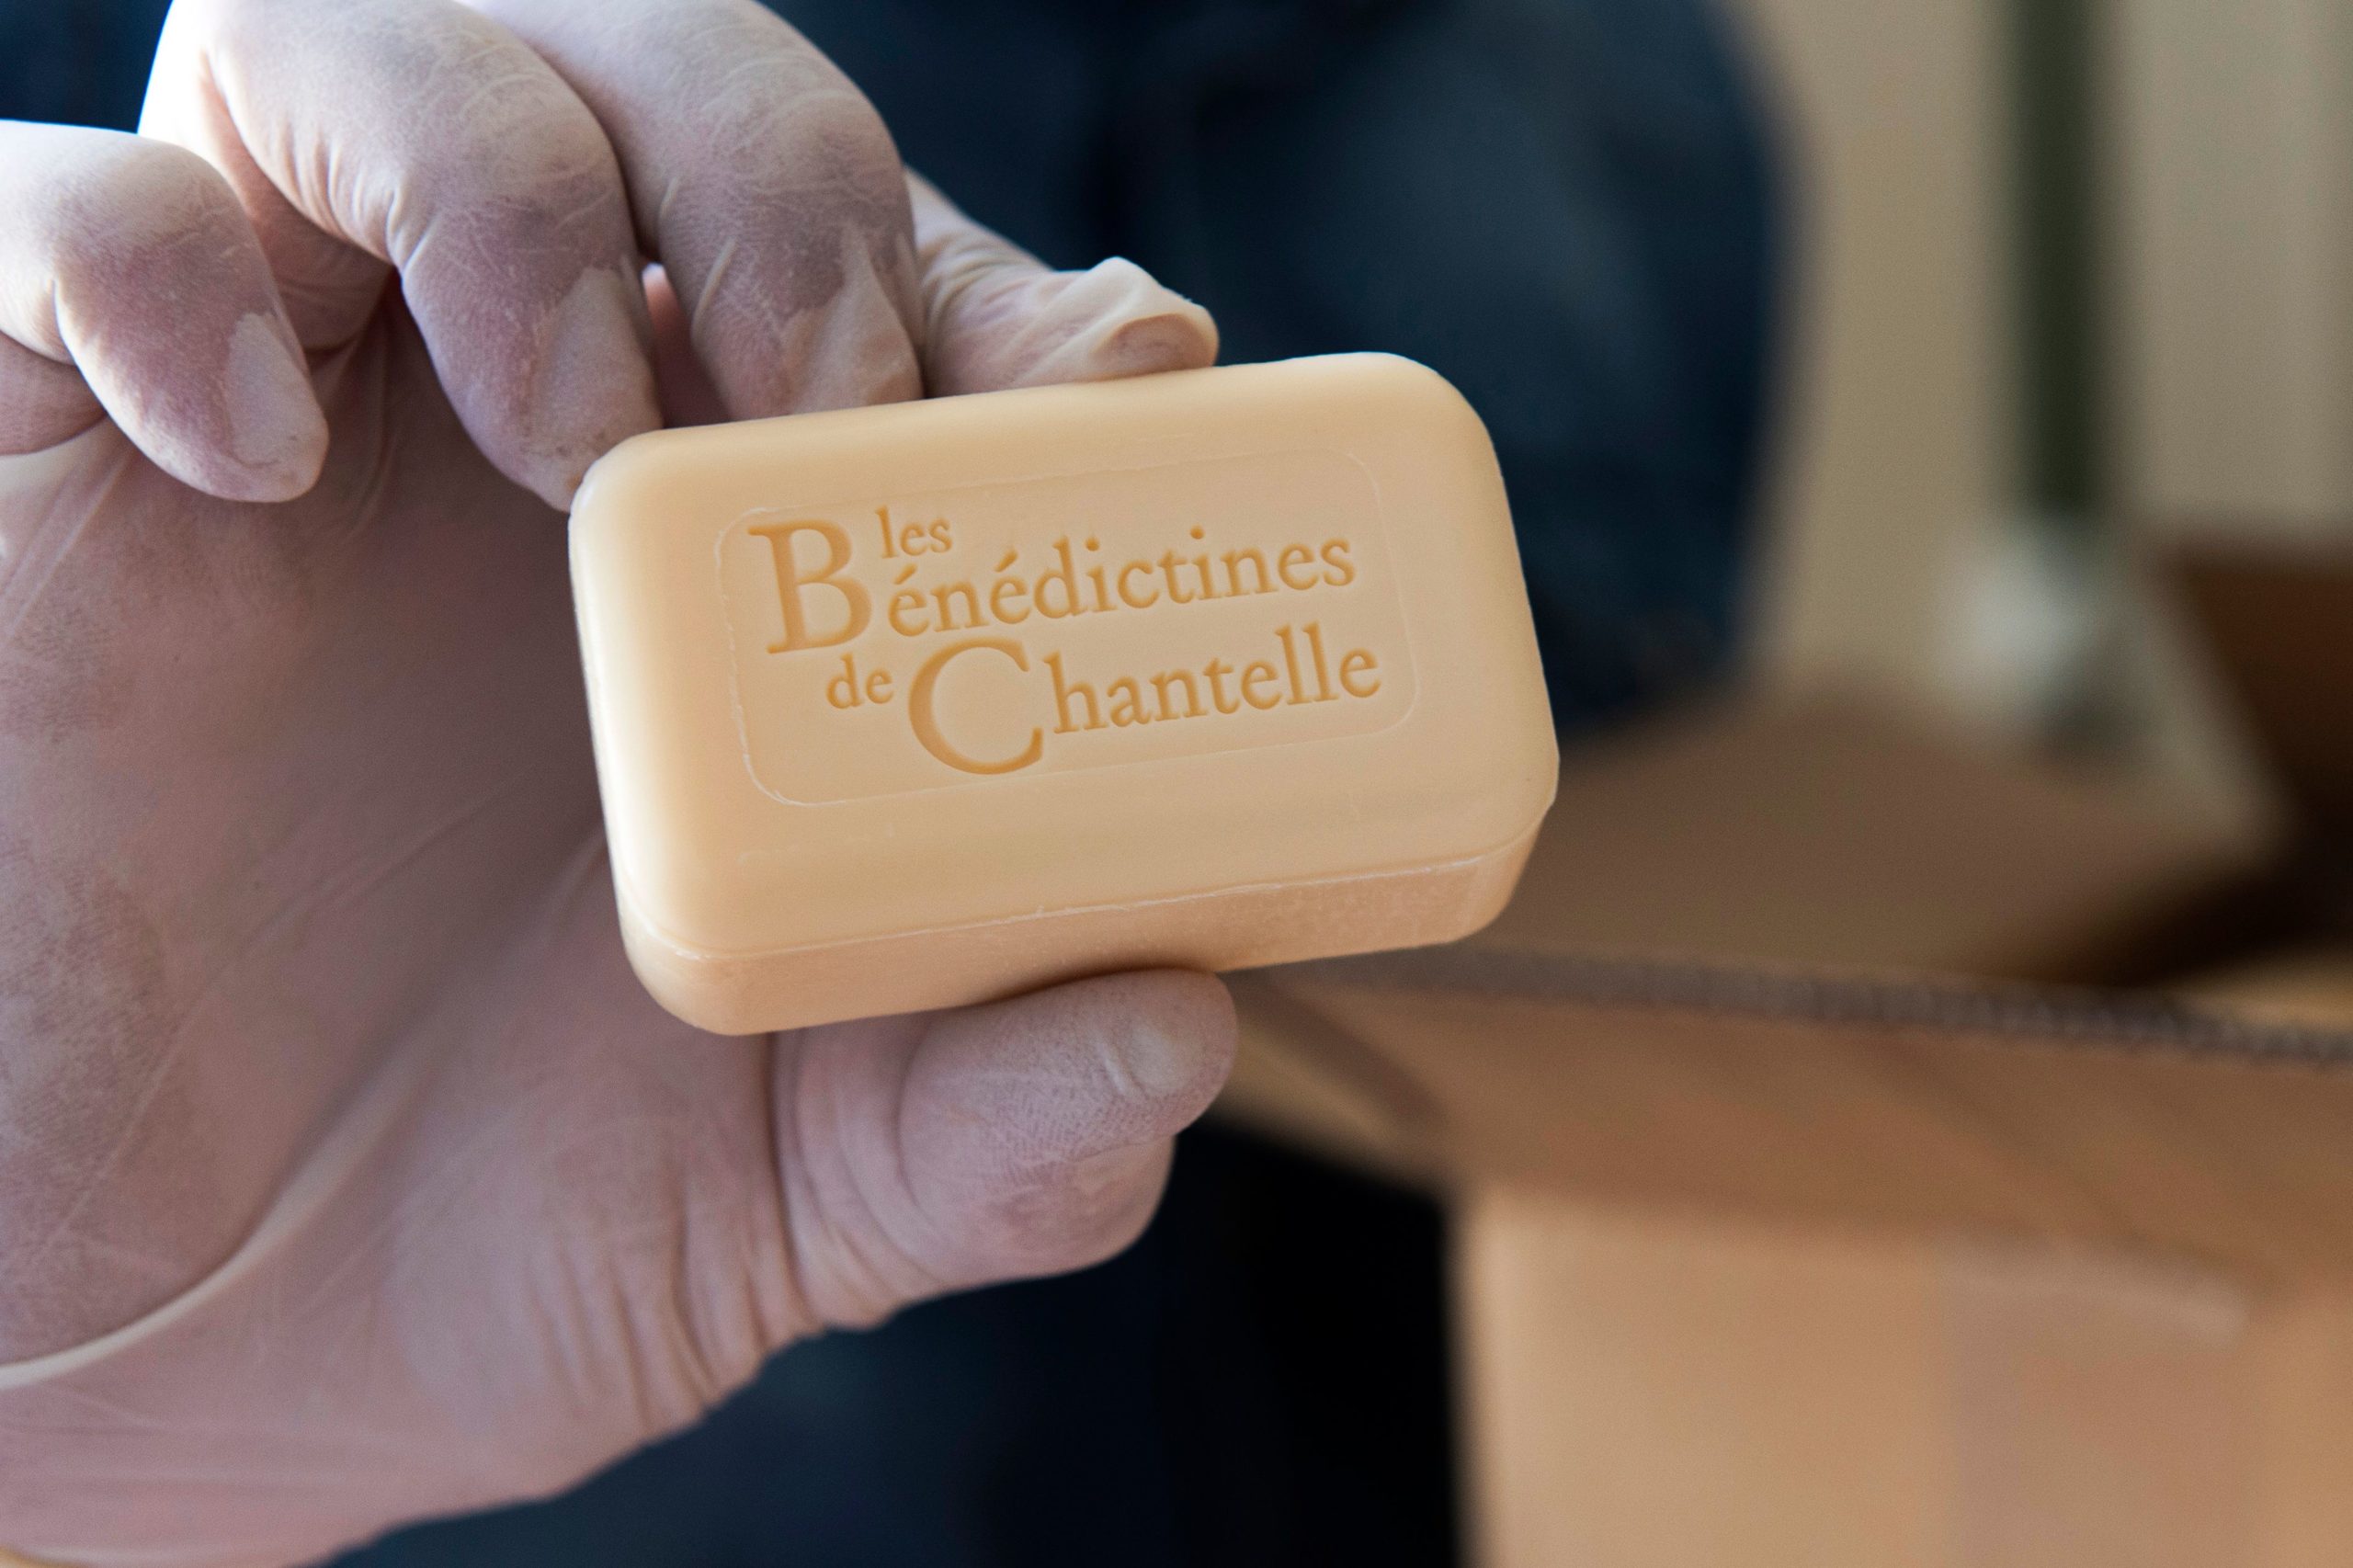 A bar of soap is pictured at the Saint-Vincent abbey in Chantelle on September 30, 2017. - Sisters at the Saint-Vincent abbey in Chantelle, who employ some ten non-religious people, have been manufacturing beauty products since 1954 thanks to two of them, one a chemist and the other a mathematician. Body milk, soaps, shower gels and even moisturizing cream, the abbey's production, with its own laboratory, has continued to diversify by adapting to the current cosmetic standards. (Photo by Thierry Zoccolan / AFP) (Photo by THIERRY ZOCCOLAN/AFP via Getty Images)